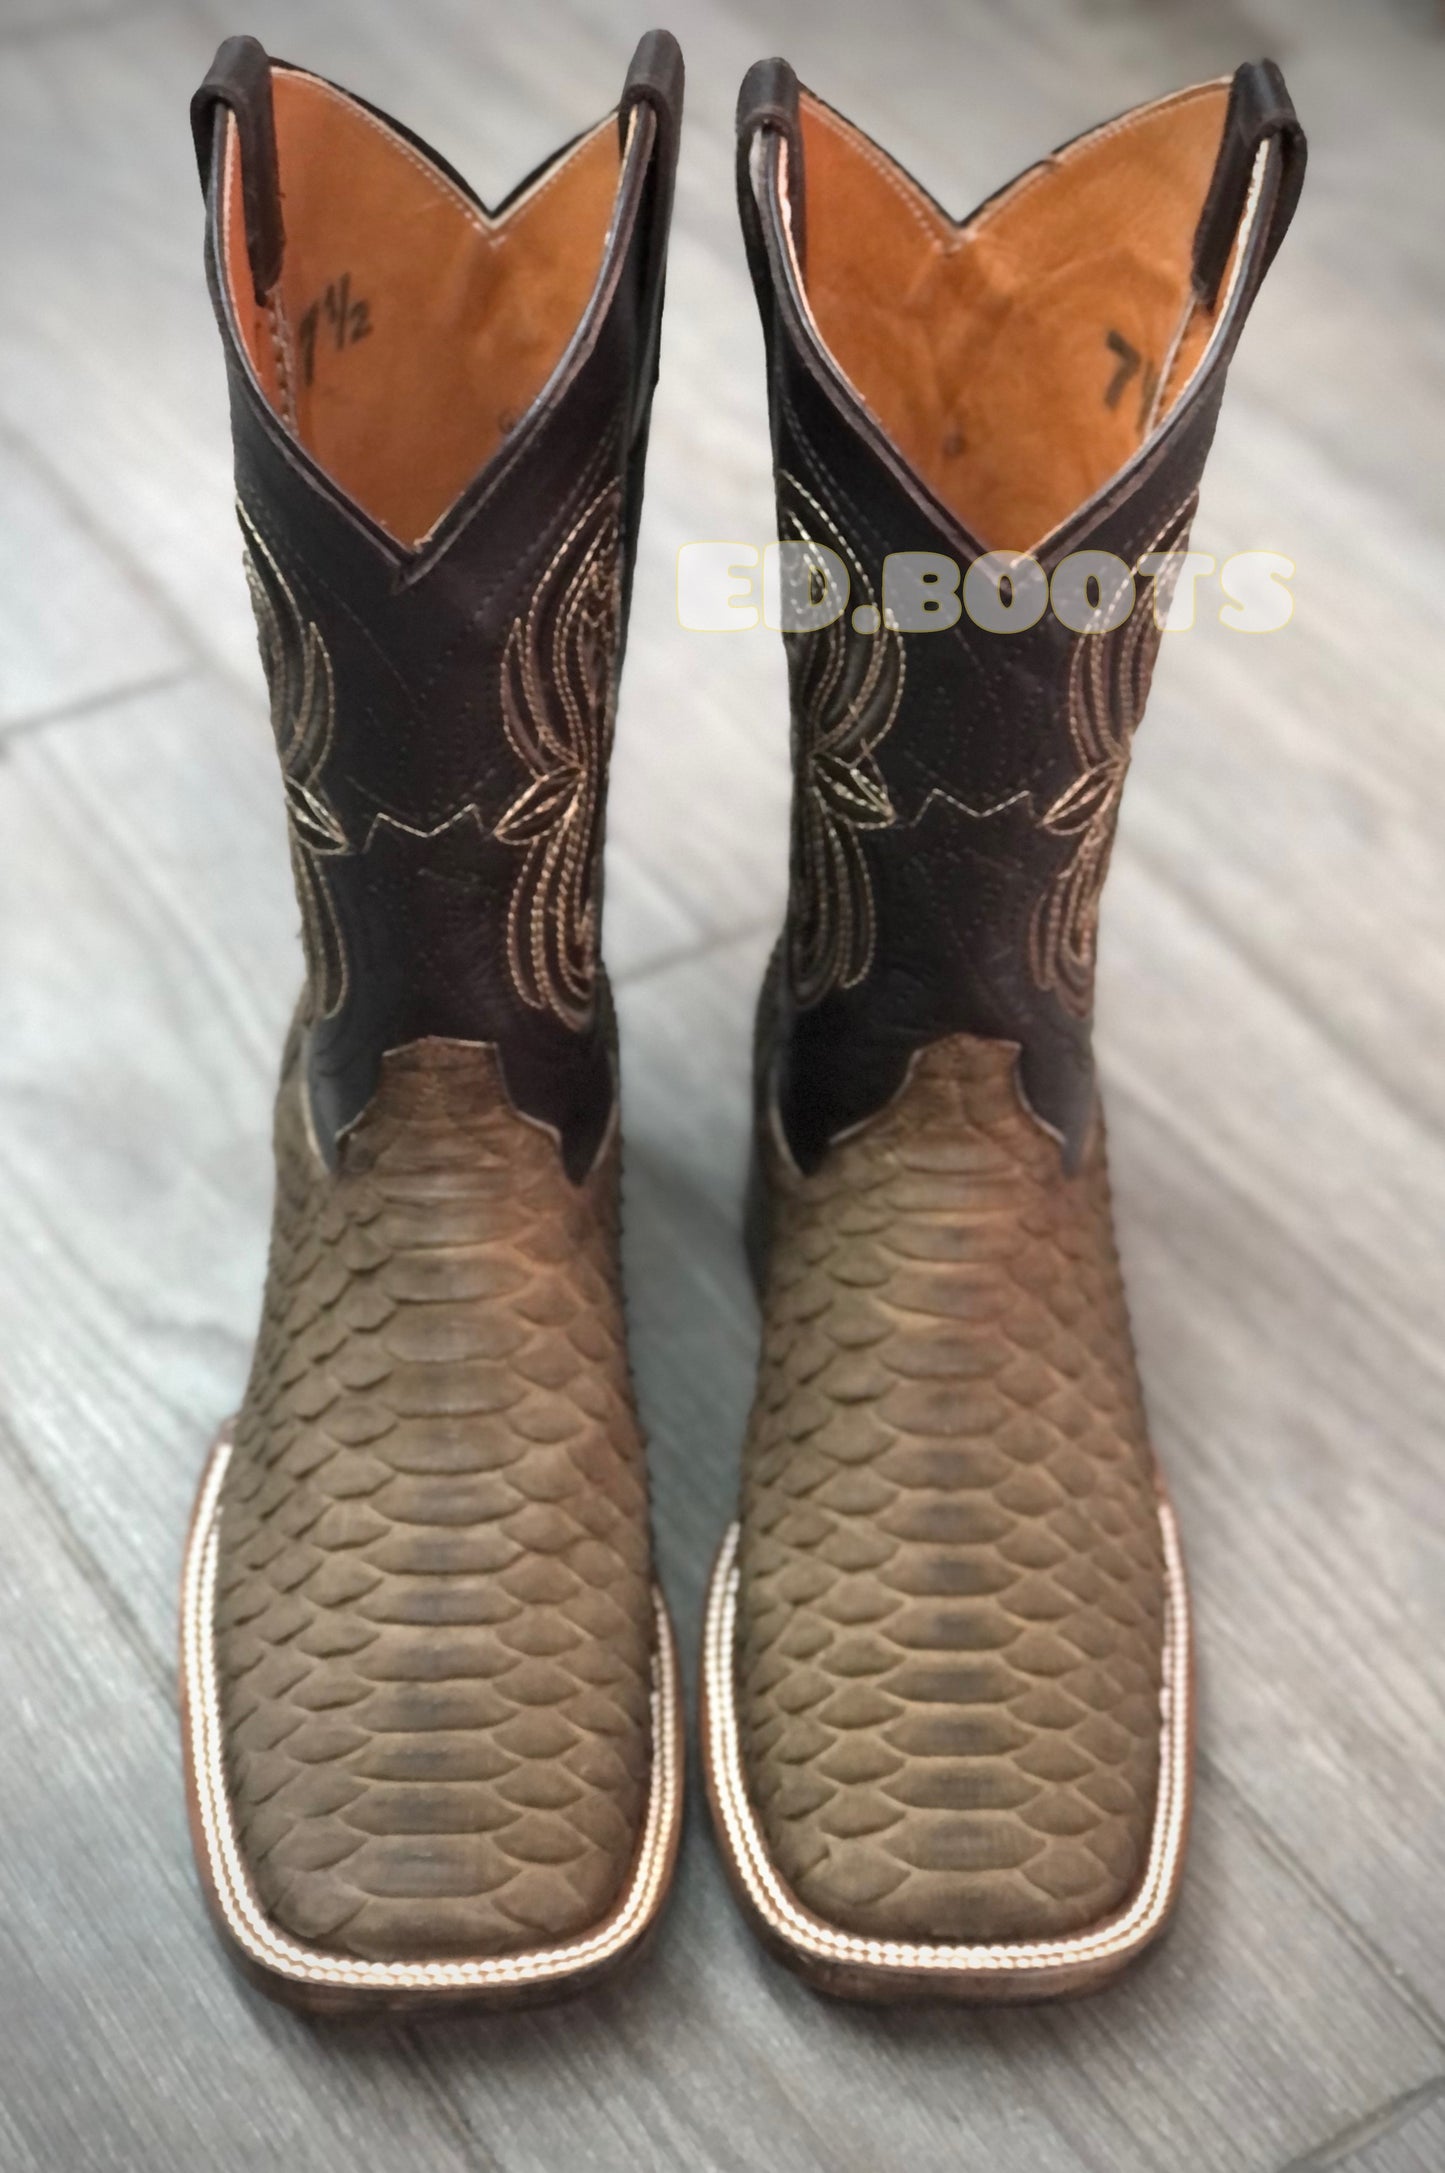 Men’s Mate green Python by ED.boots